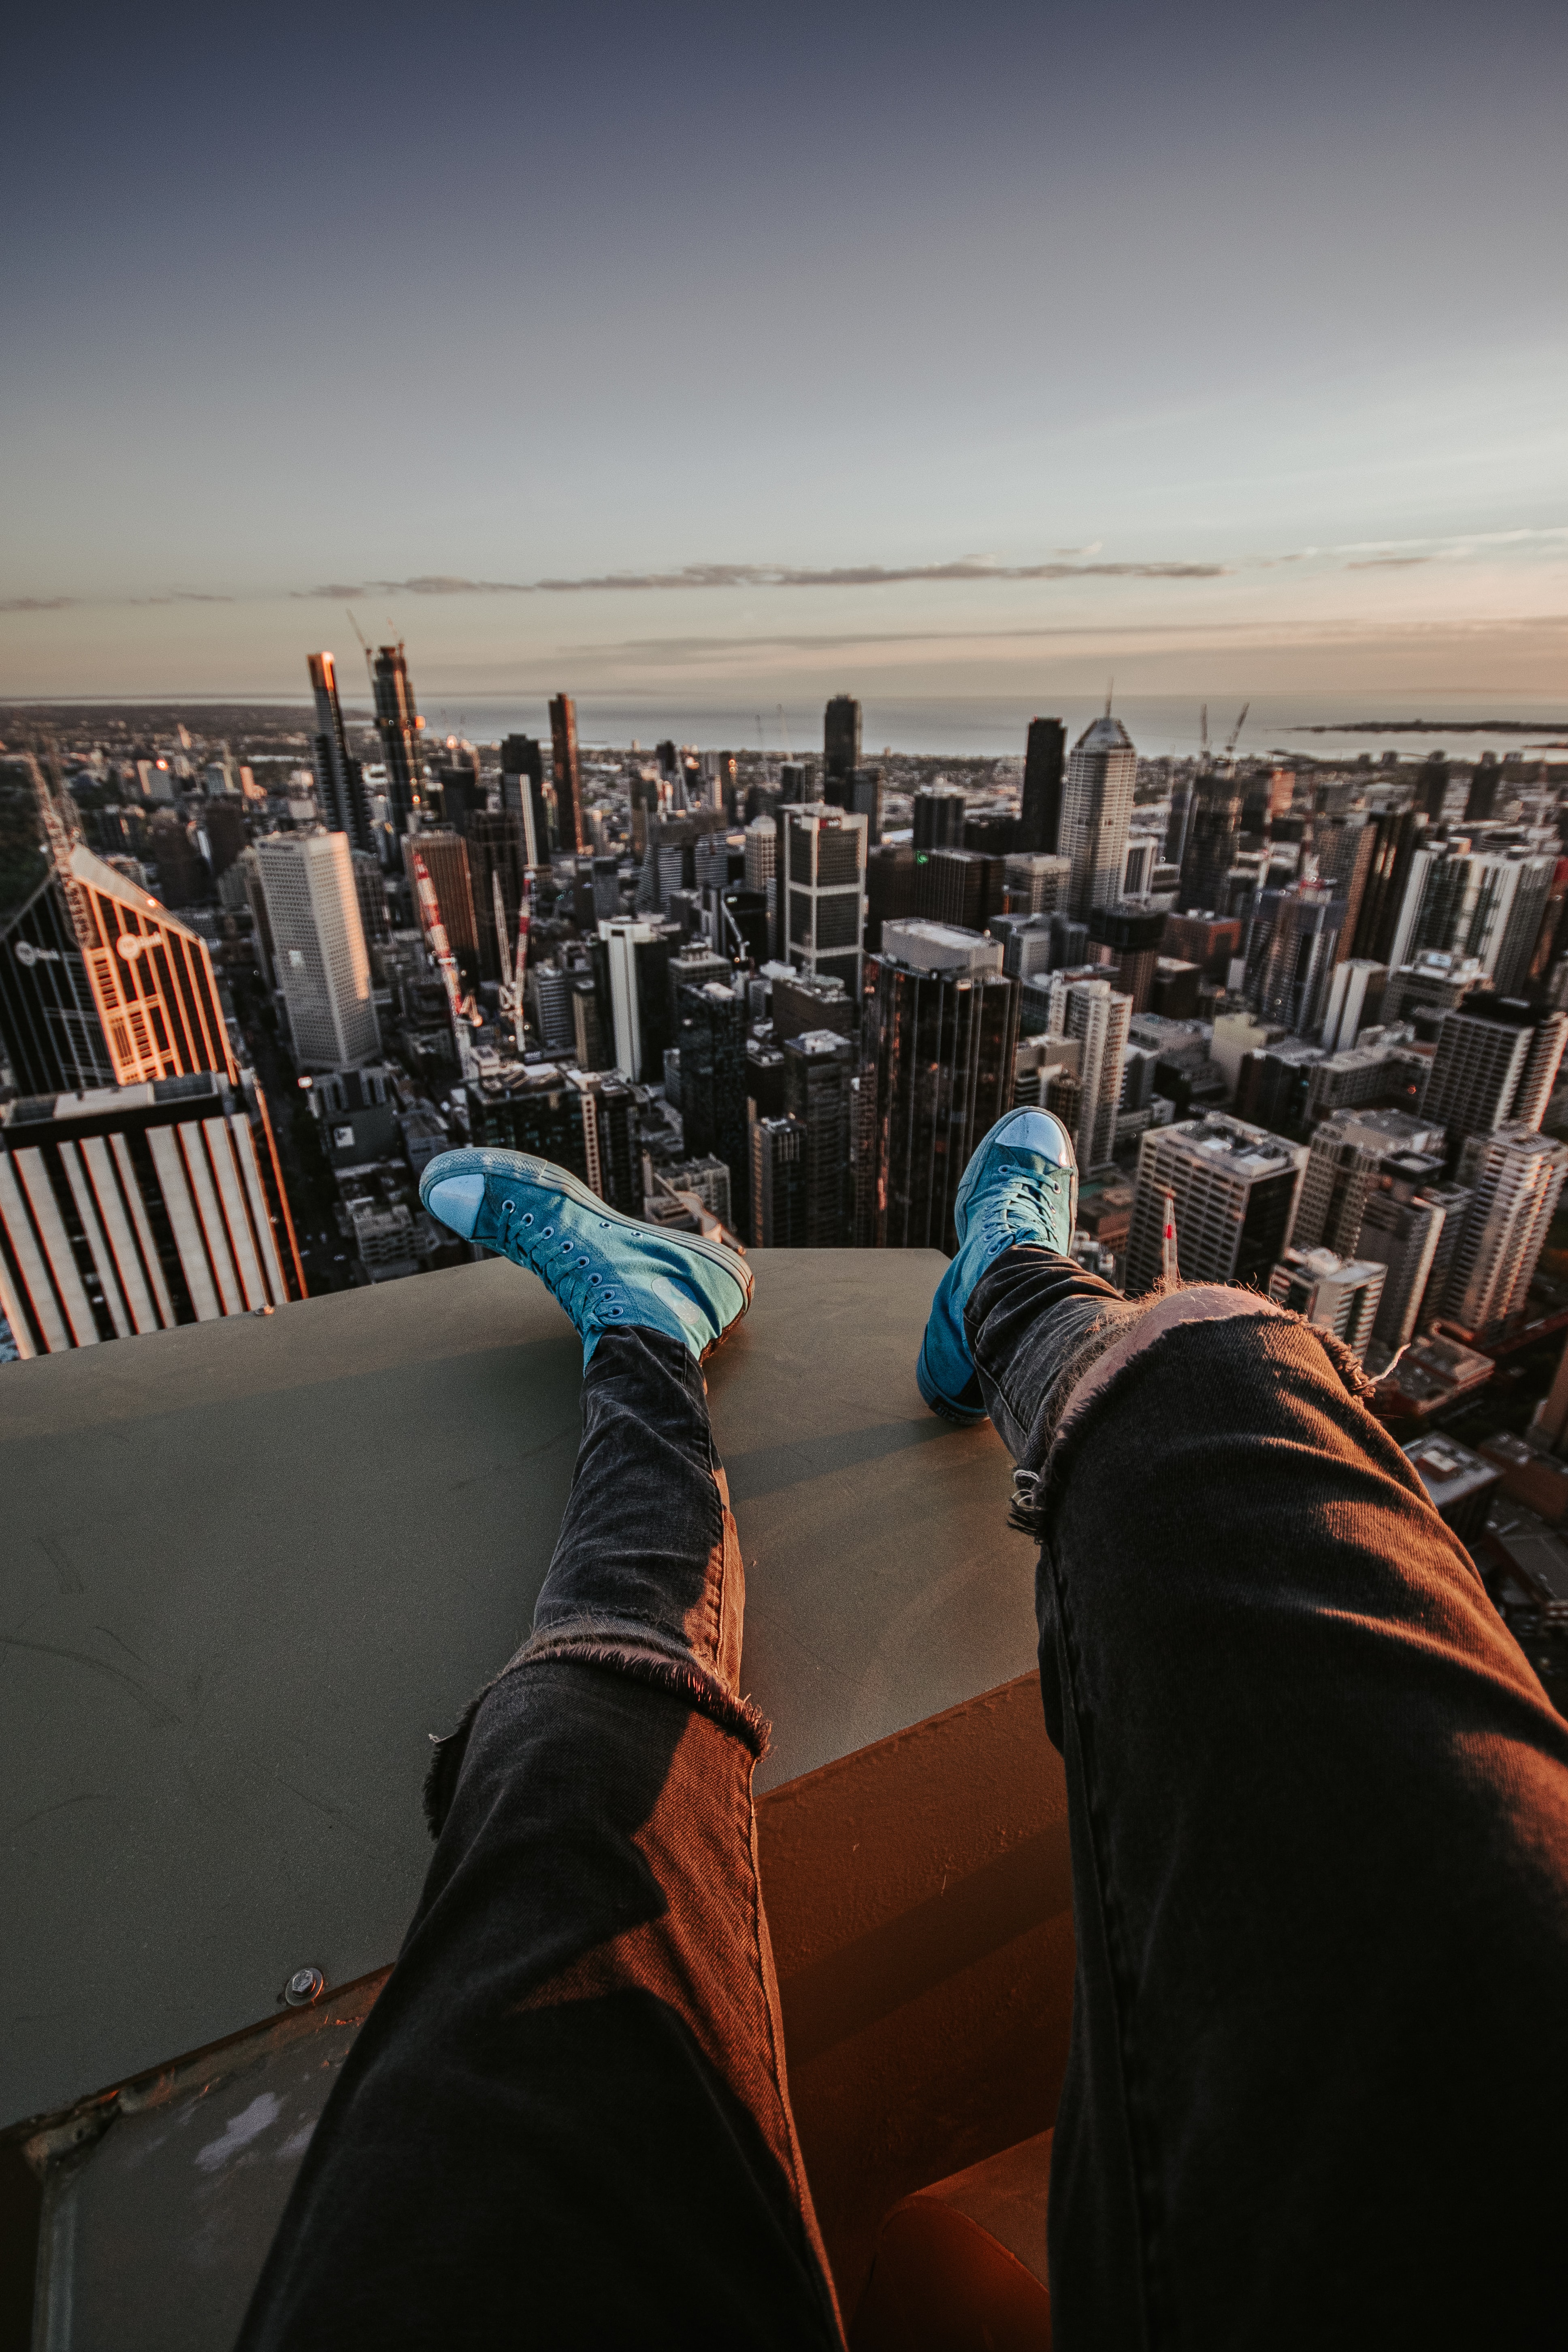 shoes, city, view from above, miscellanea, miscellaneous, legs, sneakers UHD